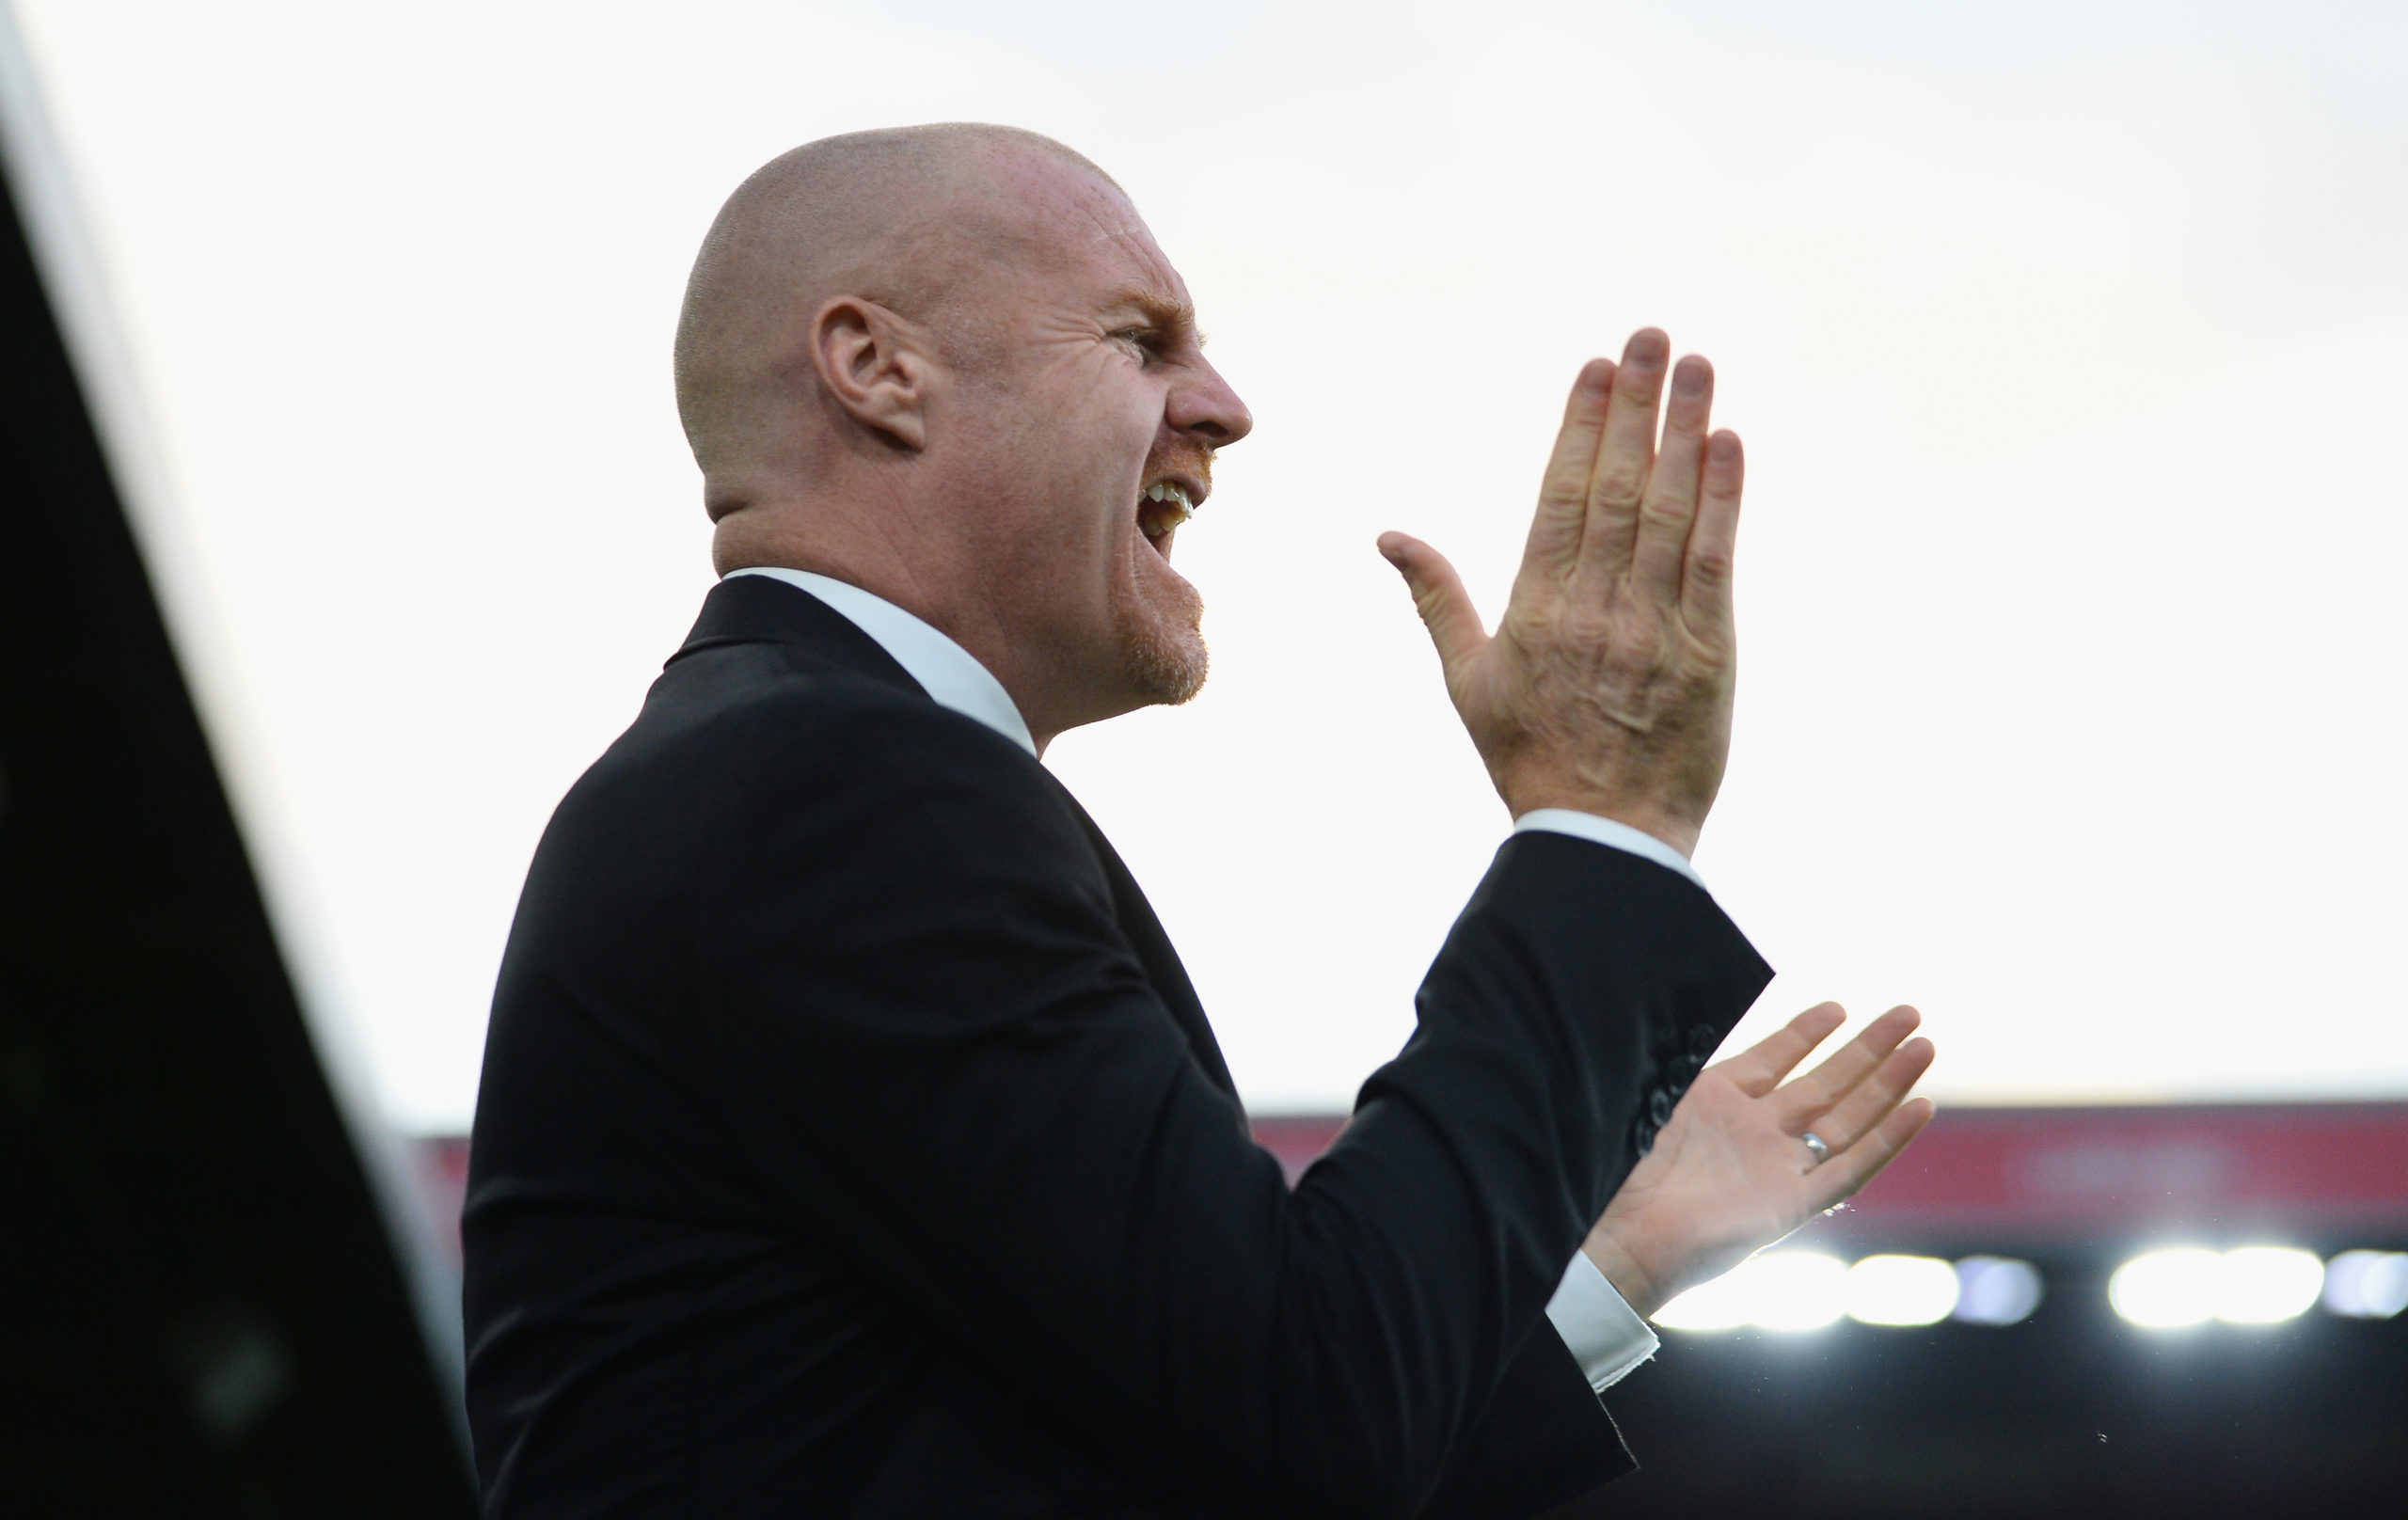 Sean Dyche, Chris Wilder and the Premier League permeations which could affect Celtic